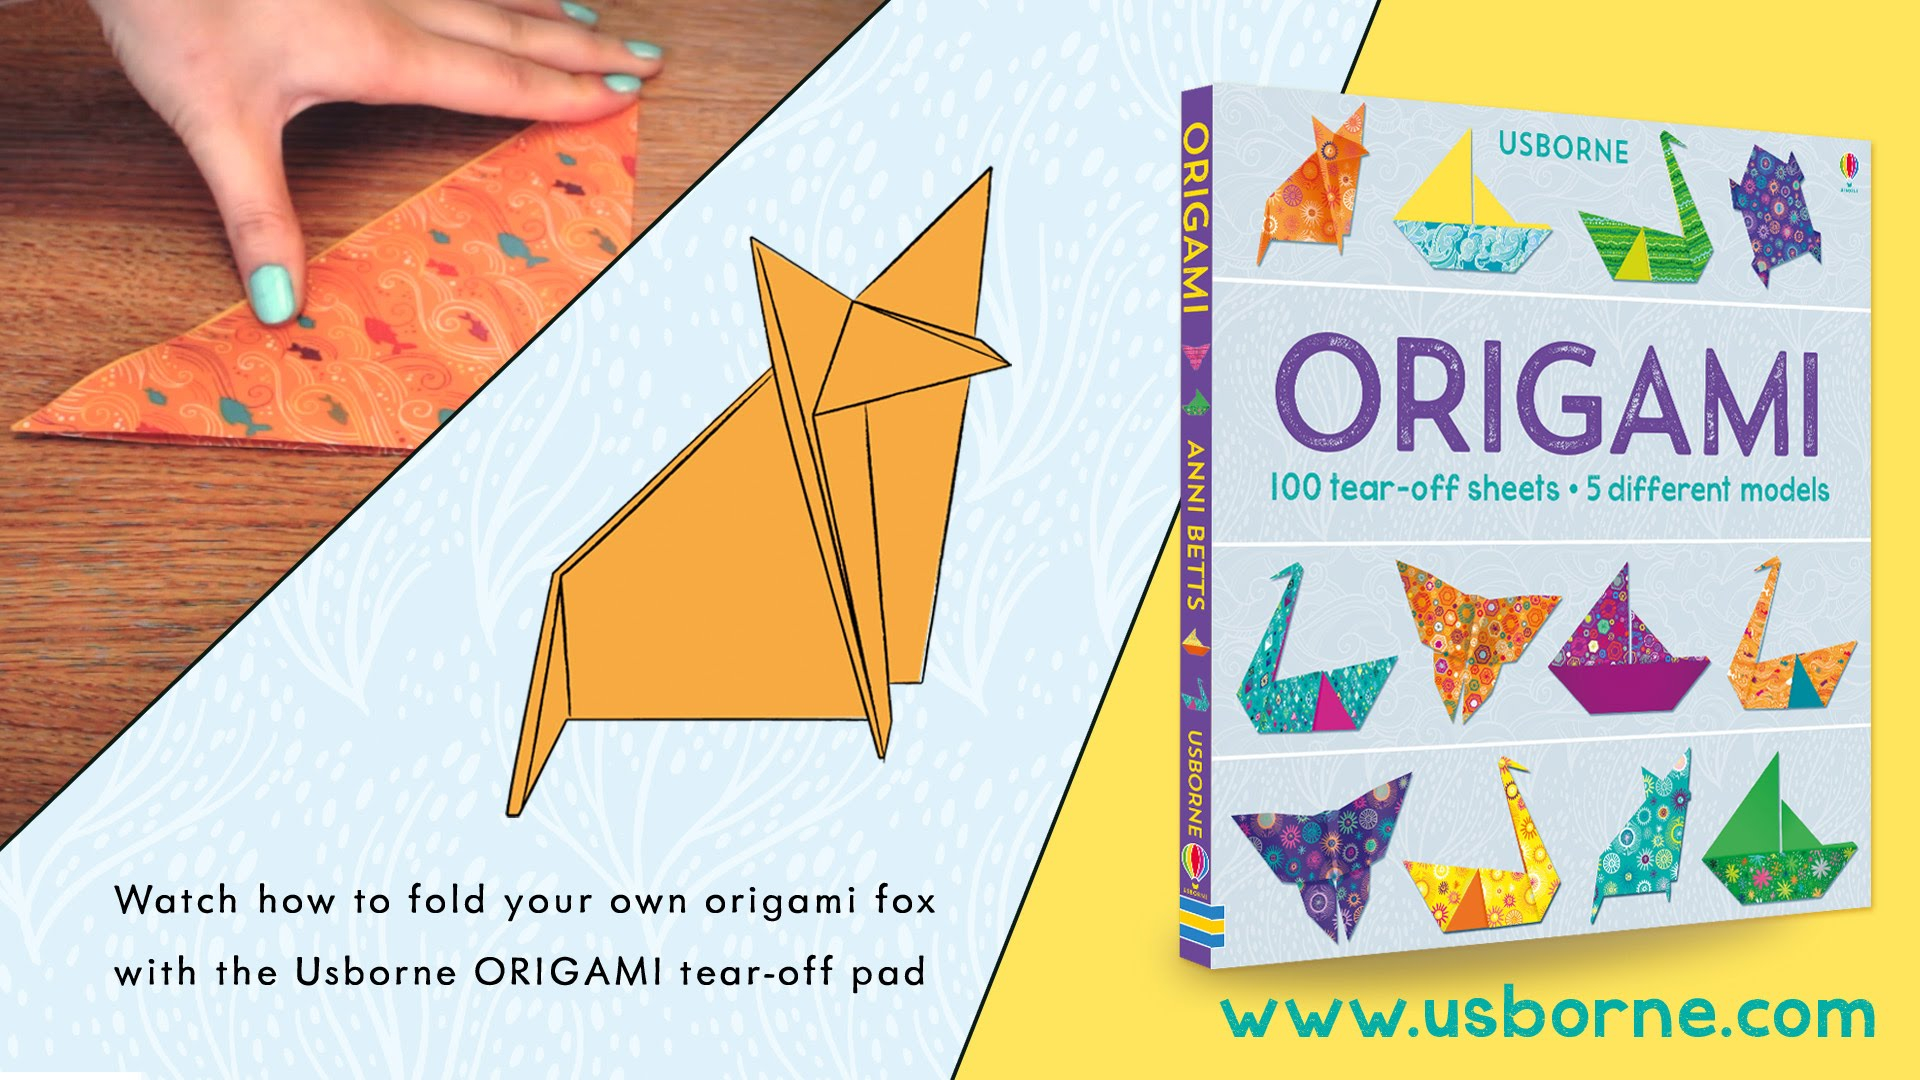 How To Make A Fox Origami Learn How To Make An Origami Fox Using The Usborne Origami Tear Off